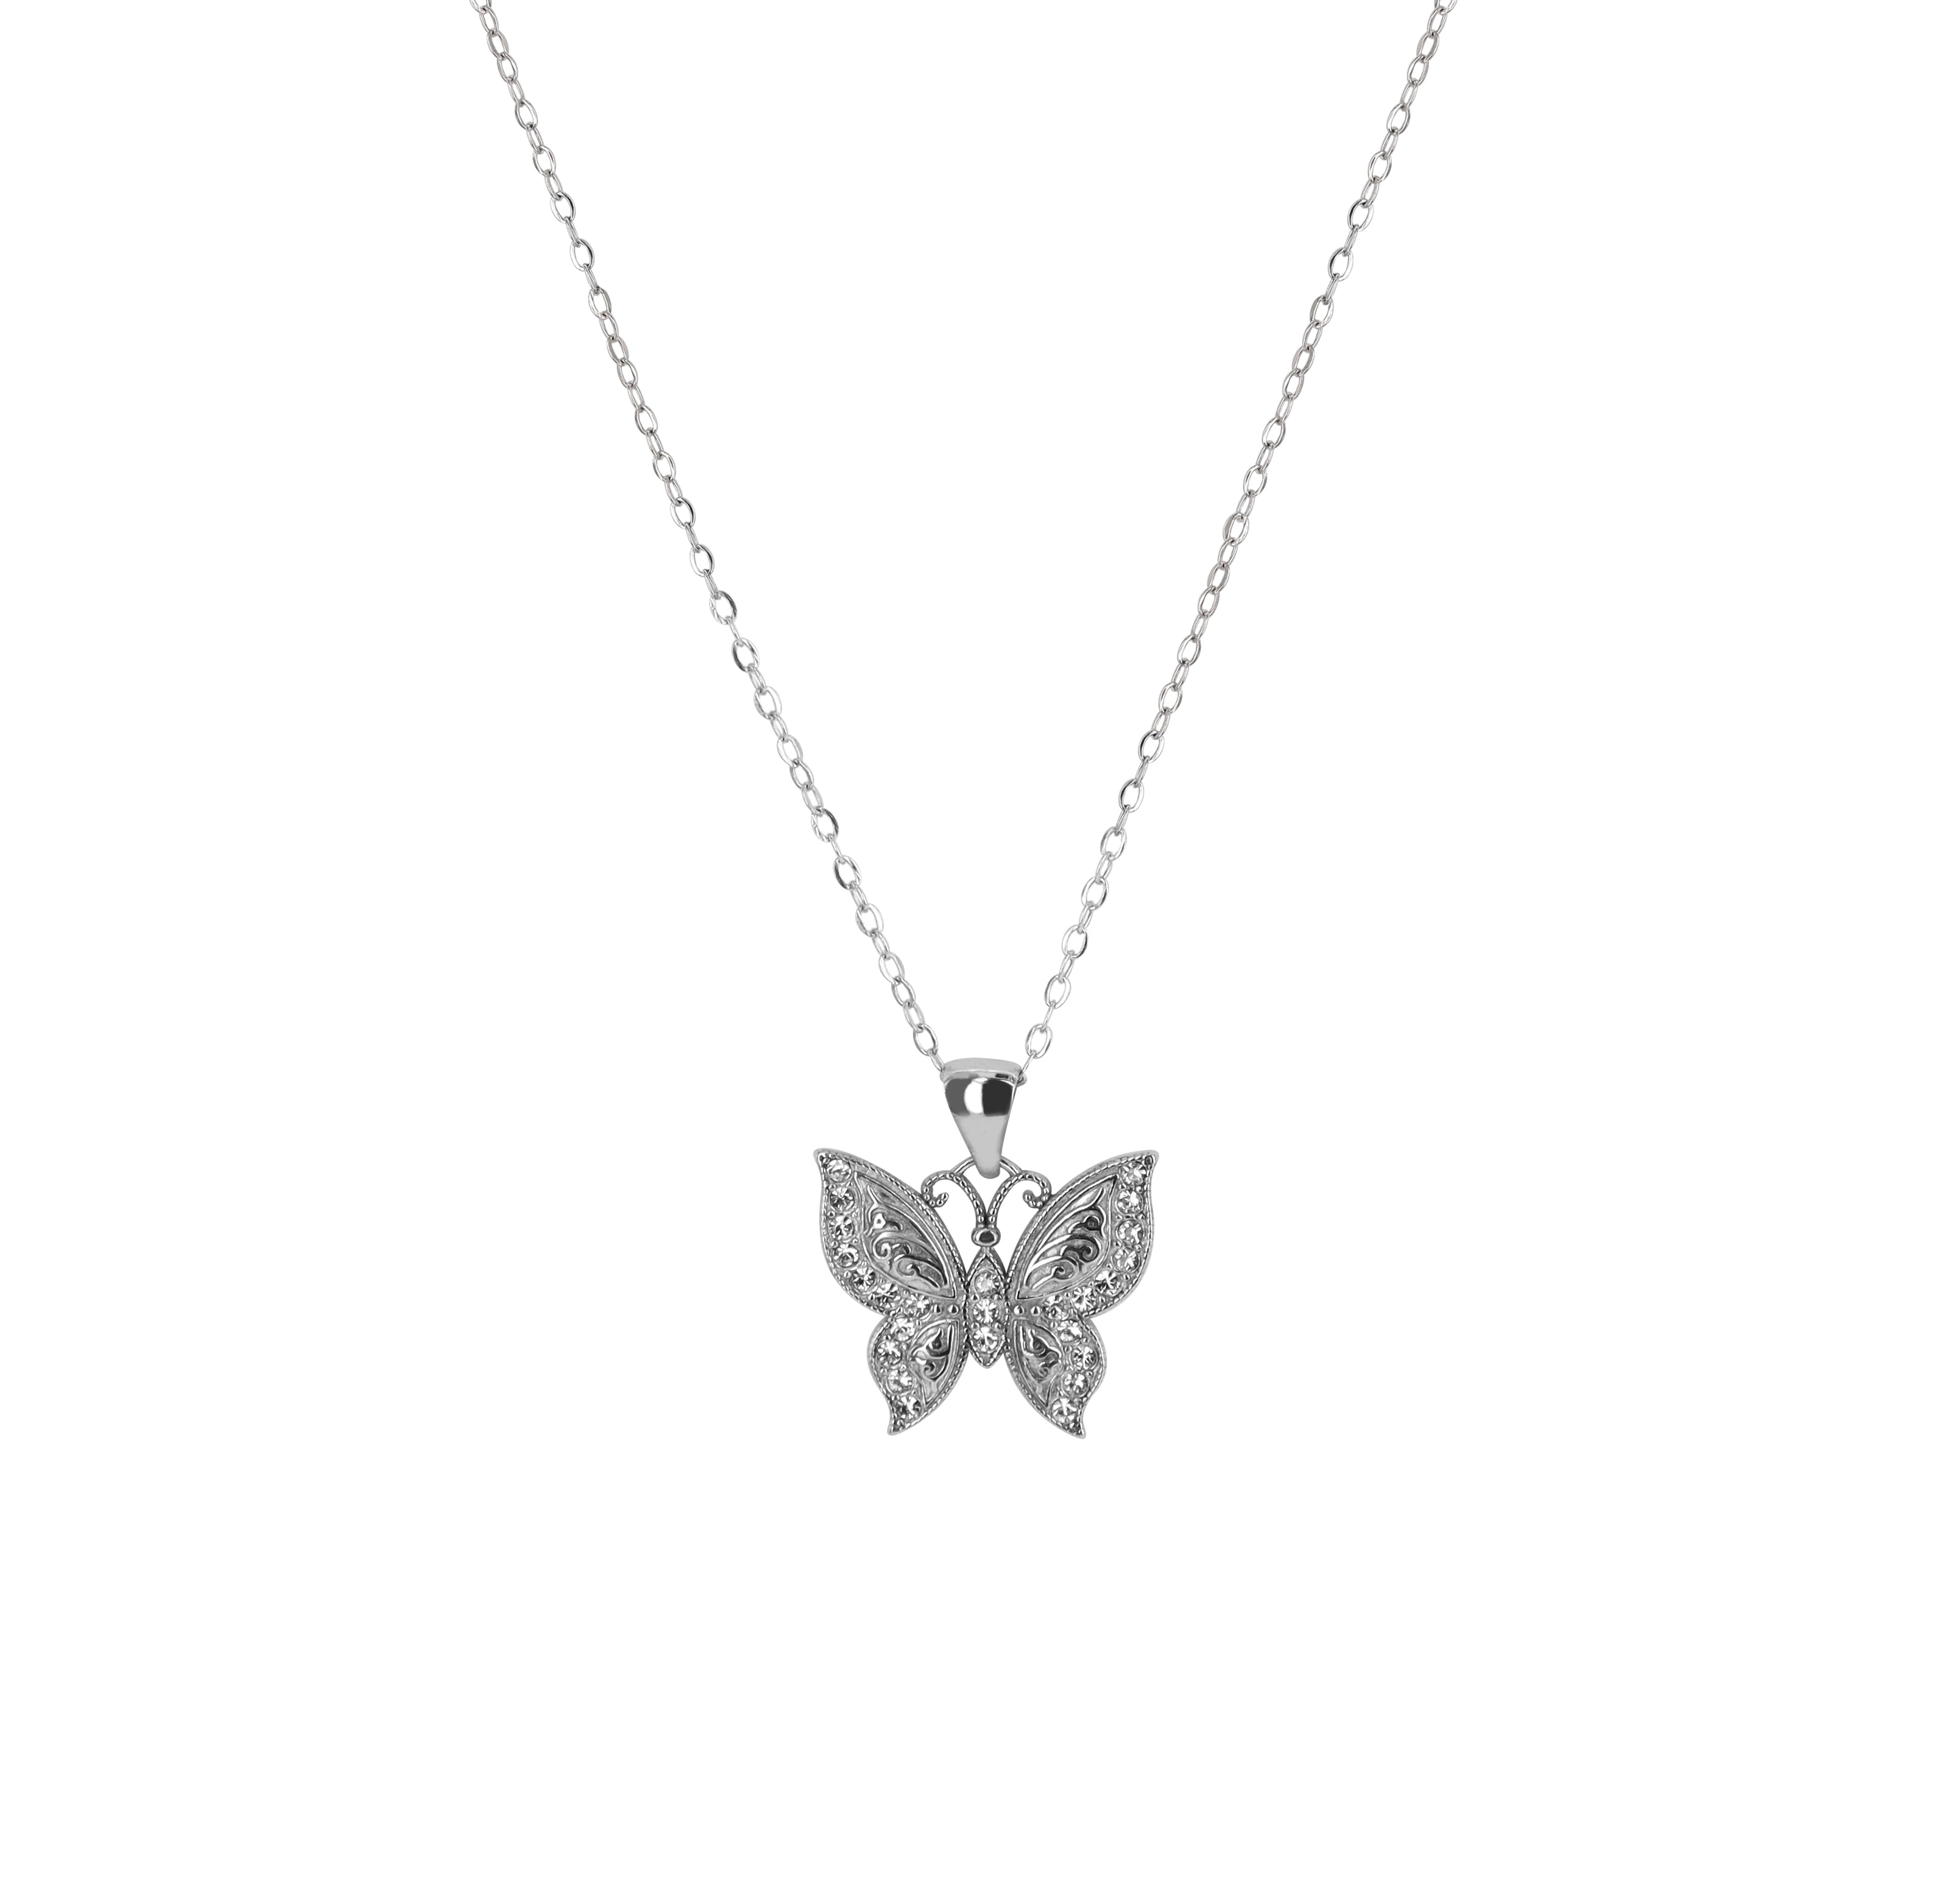 Butterfly Pendant Necklace For Women Girls 2021 Hot Sale Pretty Choker  Necklace For Beauty Jewelry Gift Wholesale Drop Shipping - Necklace -  AliExpress